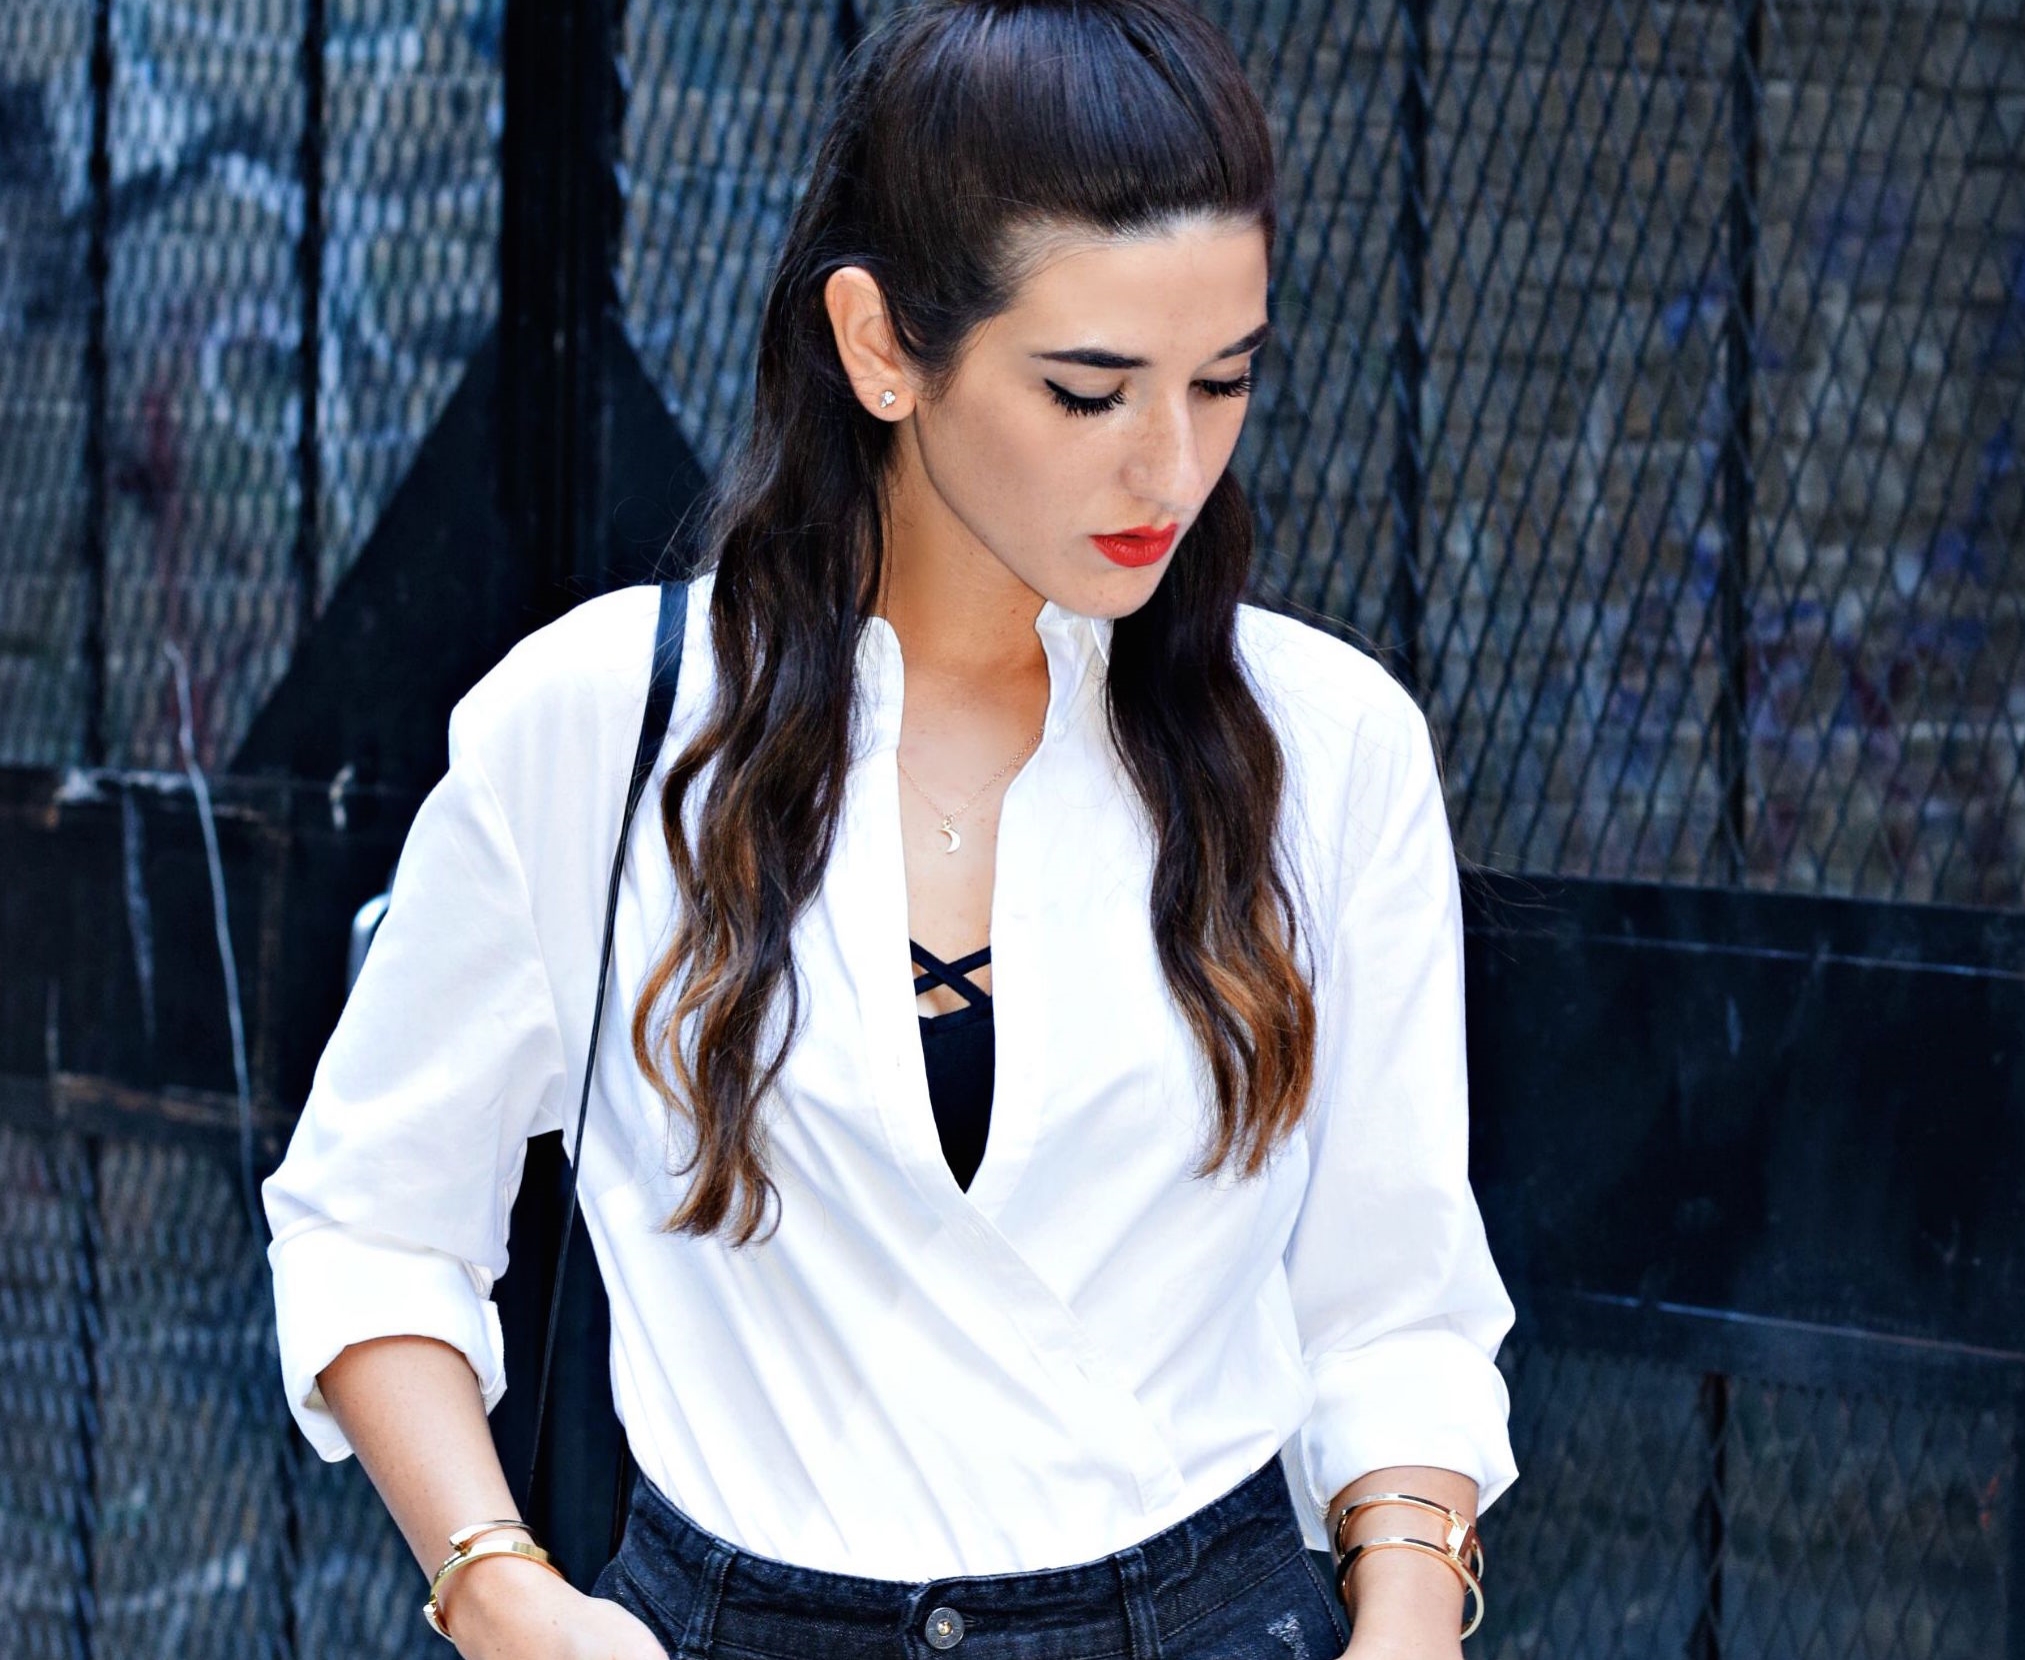 Coco & Marie Moon Necklace Giveaway Louboutins & Love Fashion Blog Esther Santer NYC Street Style Blogger Lifestyle Topknot Bun Denim Ripped Jean Skirt White Button Down Zara Black Box Clutch Bag Bralette Nordstrom Booties Gold Jewelry Women Girl Shop.JPG